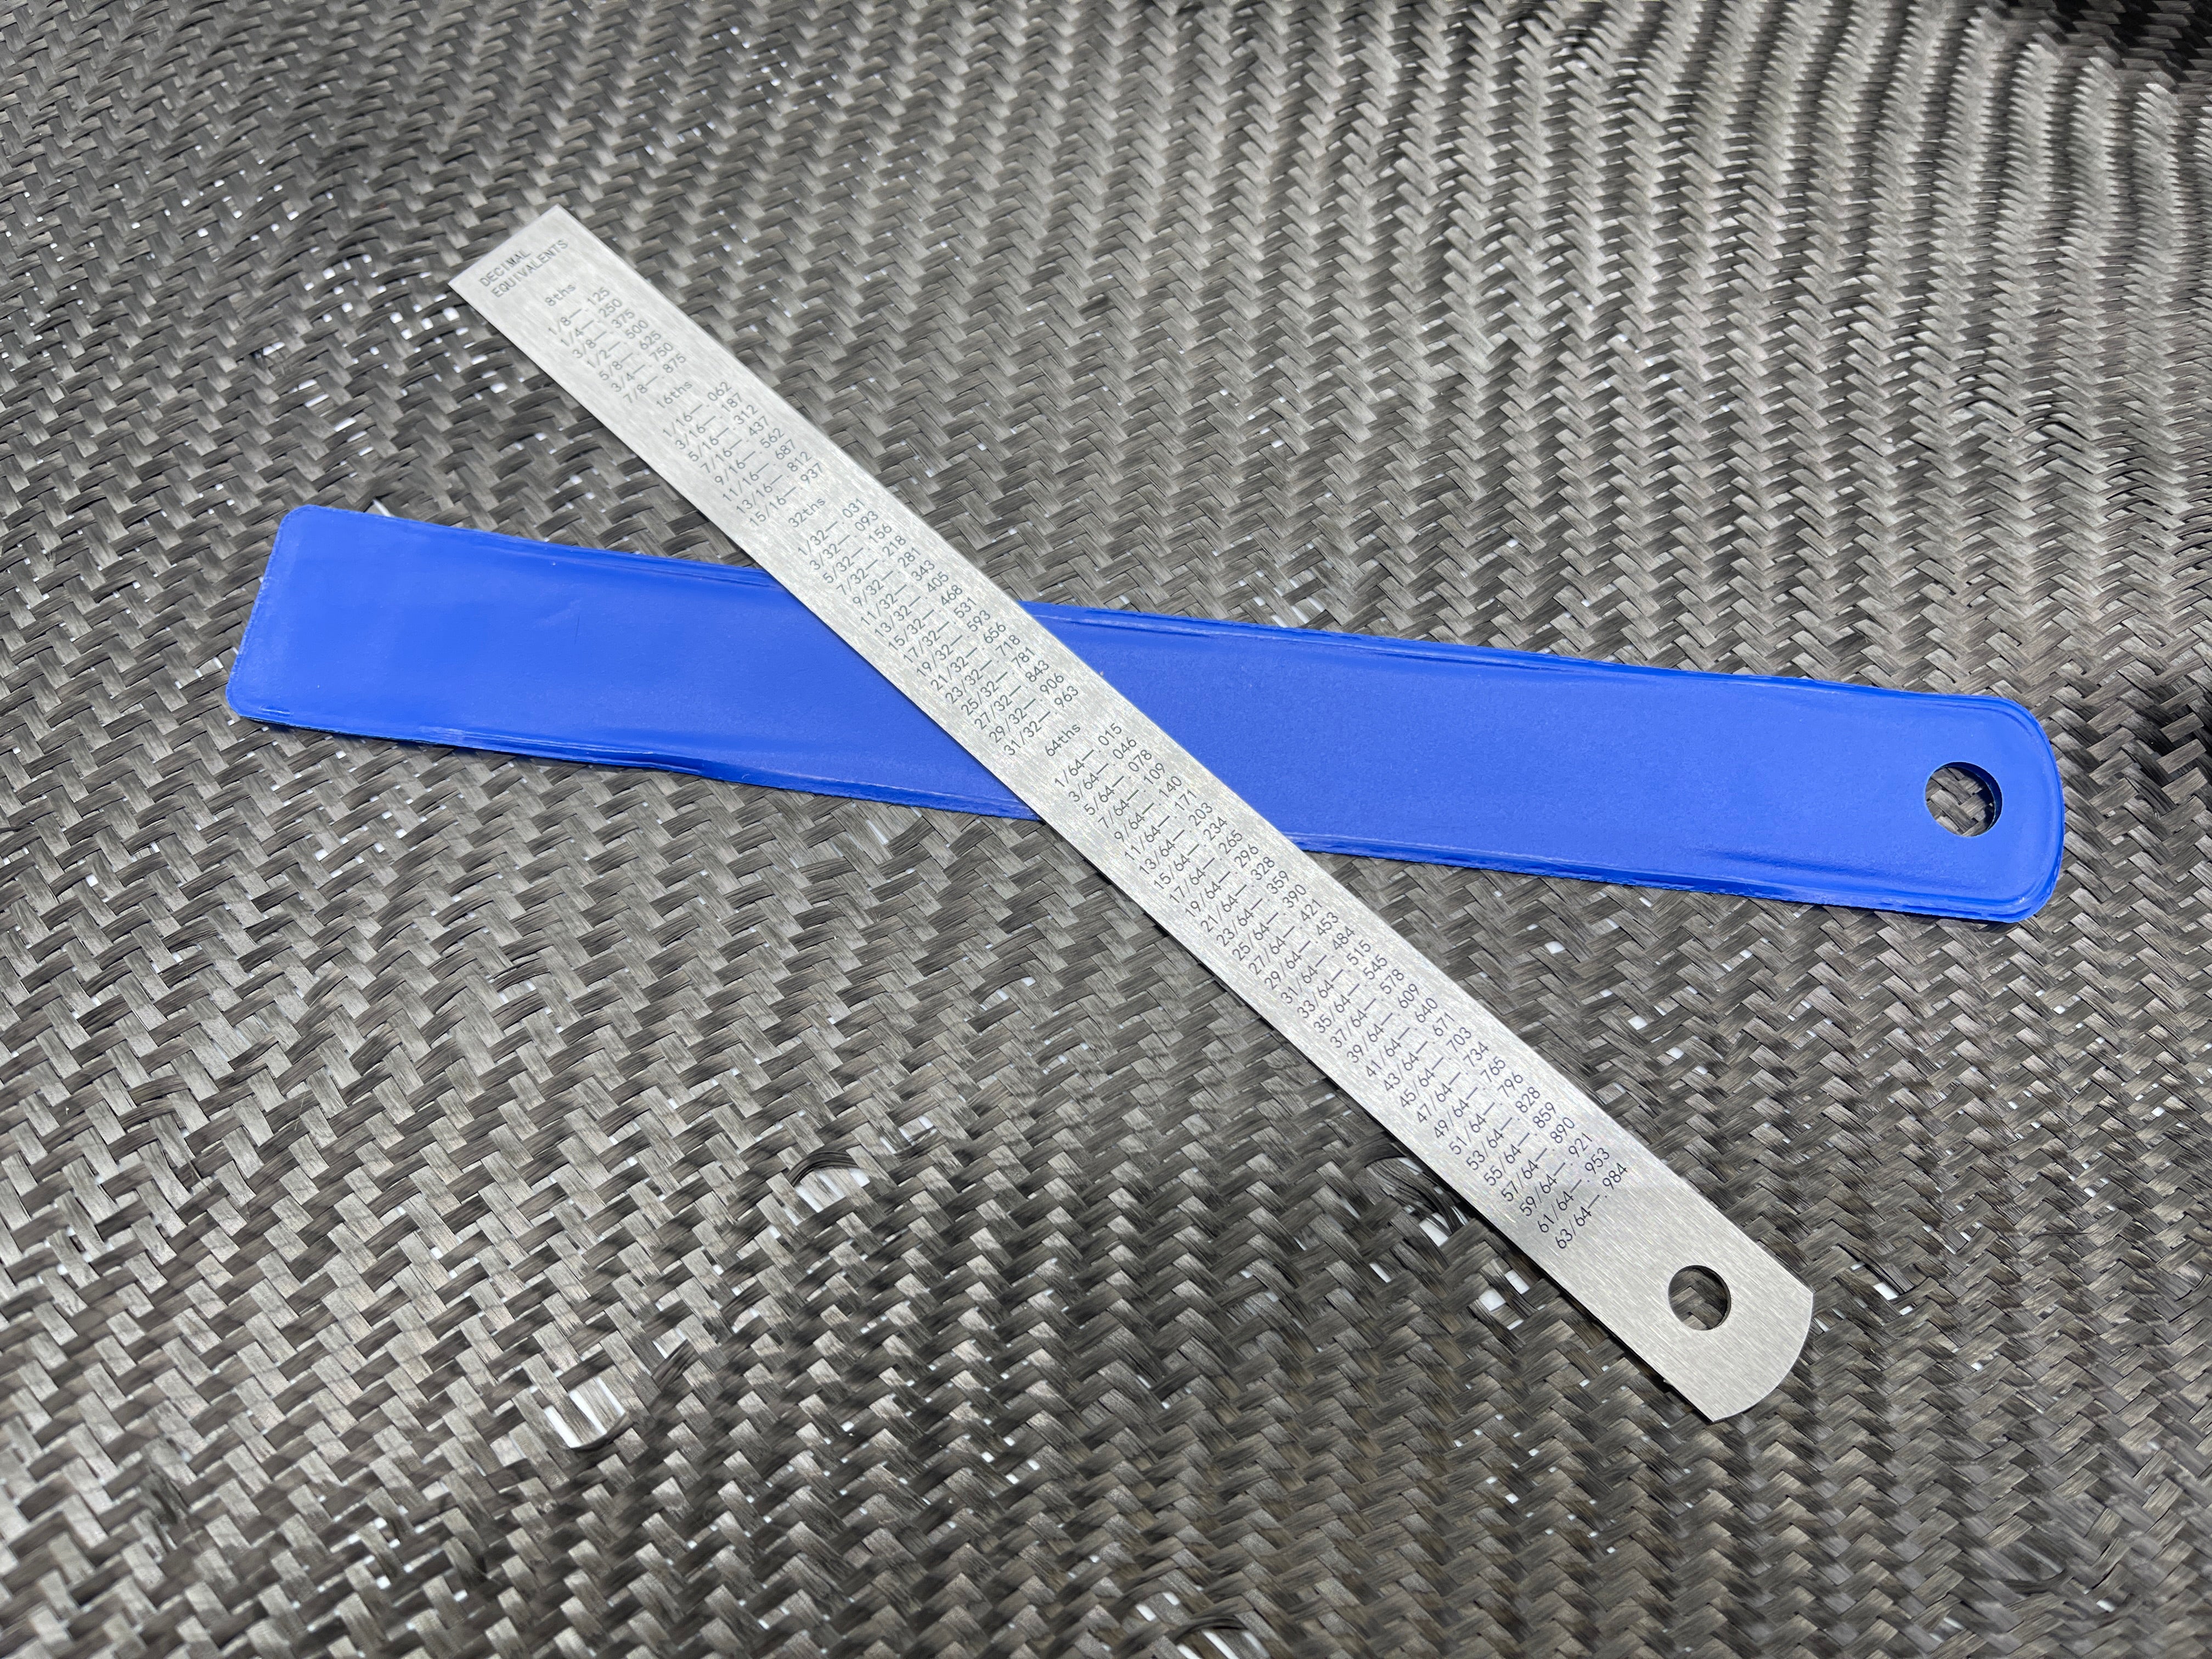 Flexible Stainless Steel Ruler 6 in X 0.5 in, Graduate in Fractional  Inches, and mm, by Miltex - Delasco